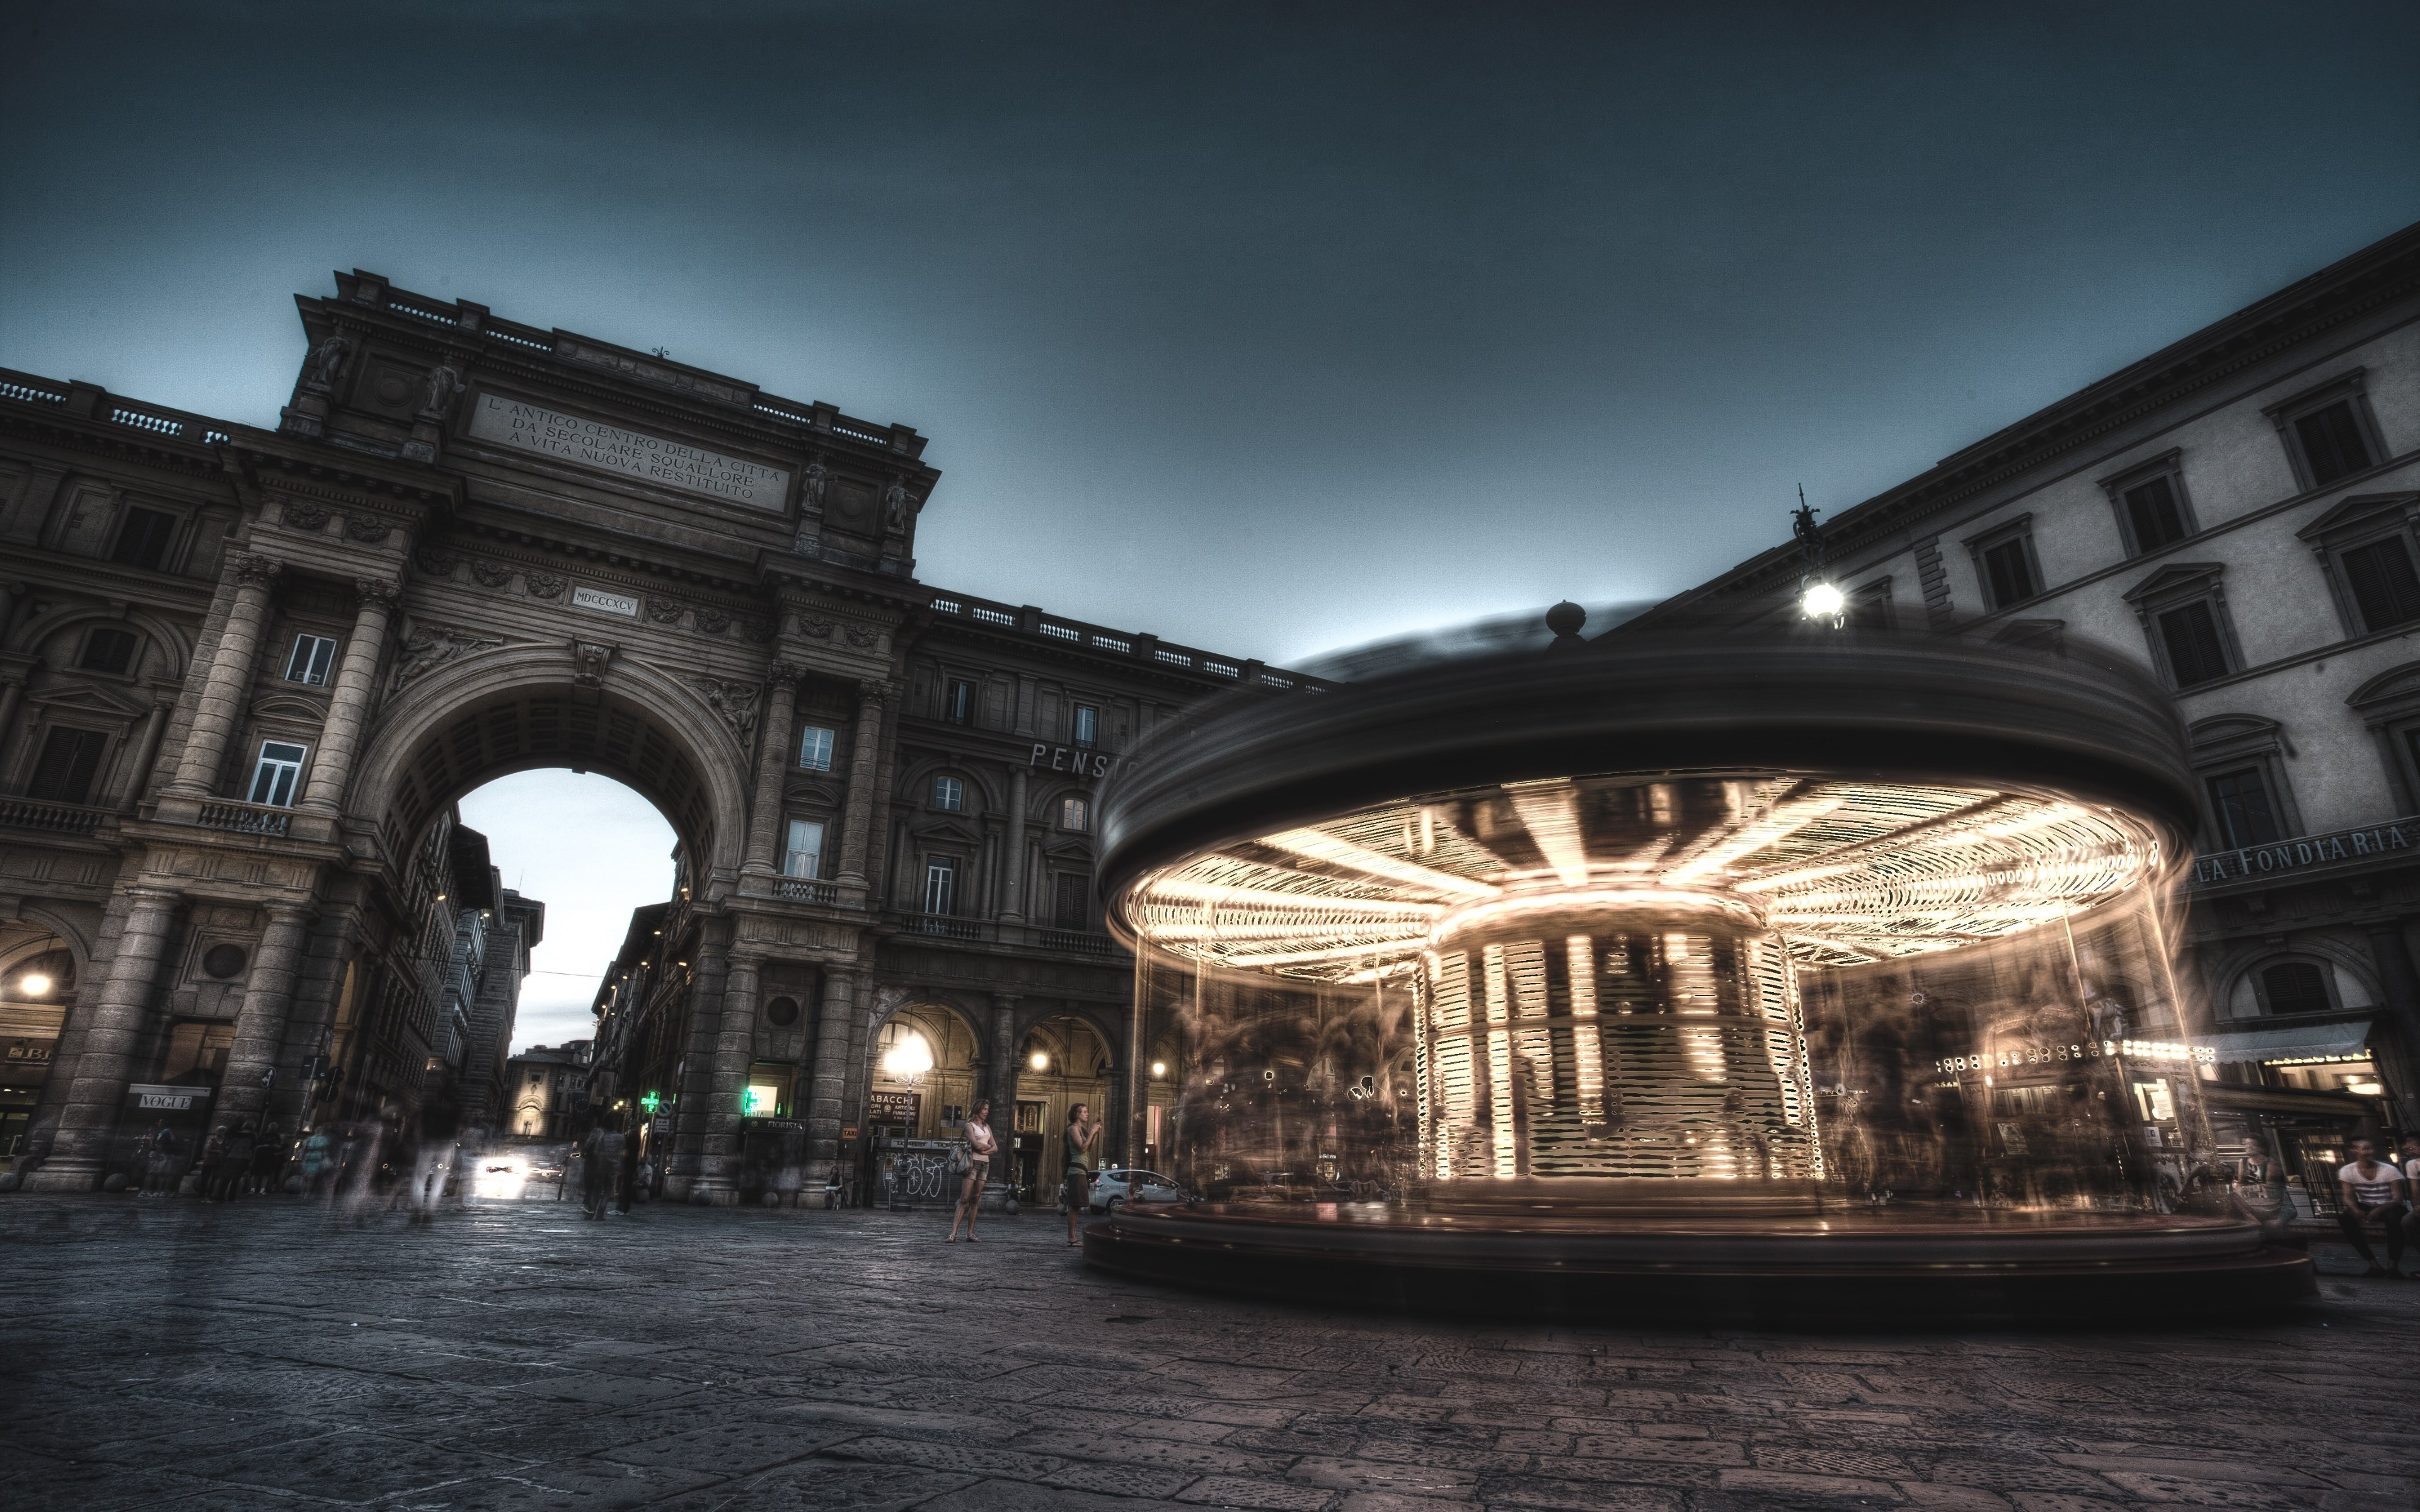 Carousel, people and buildings from Florence wallpaper 3840x2400